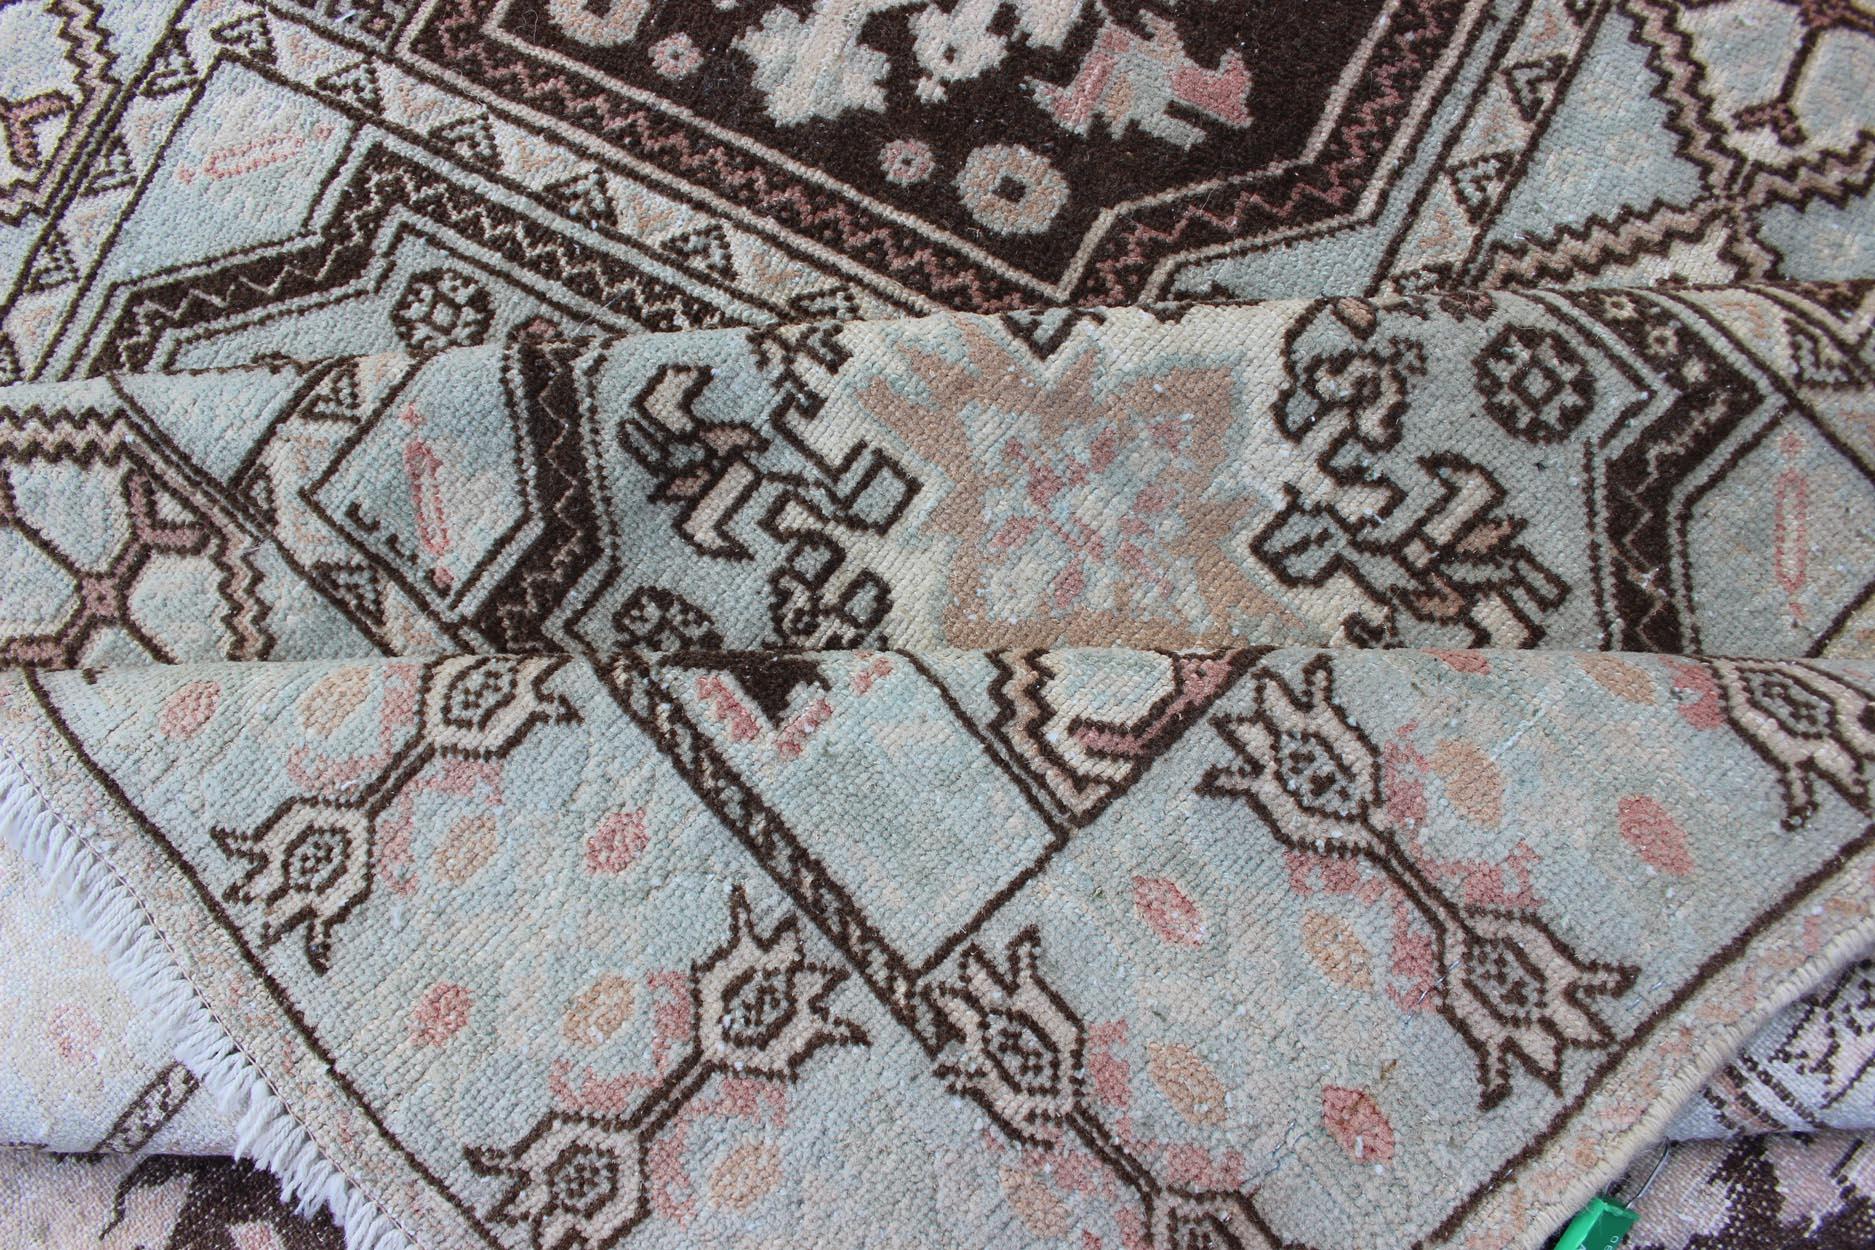 Vintage Moroccan Rug with Medallions in Black and Light Blue In Excellent Condition For Sale In Atlanta, GA